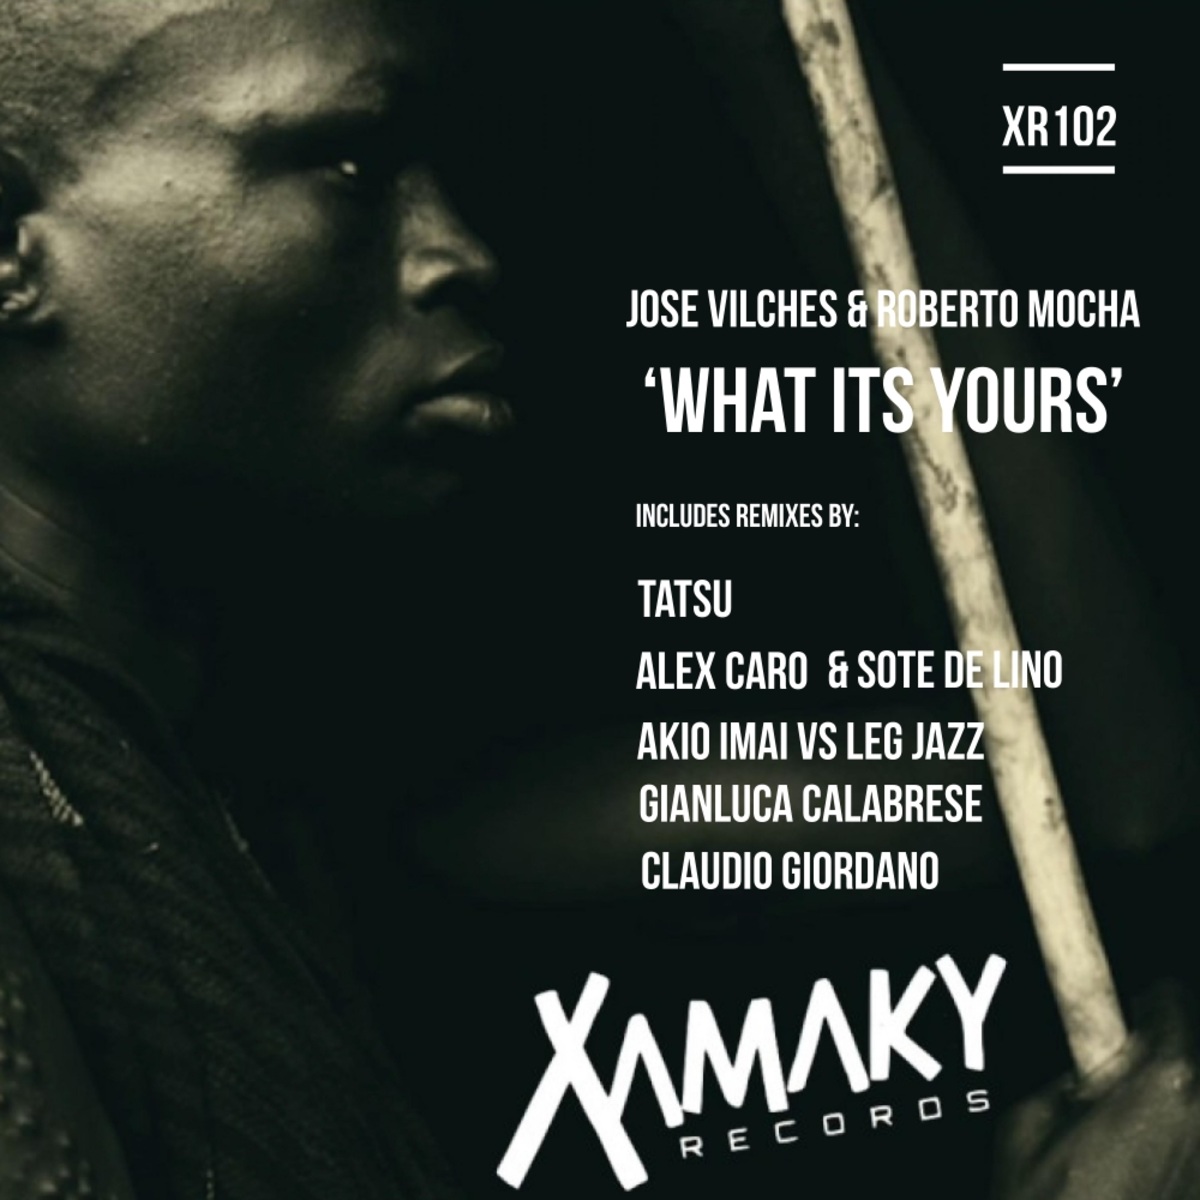 Jose Vilches - What Its Yours / Xamaky Records